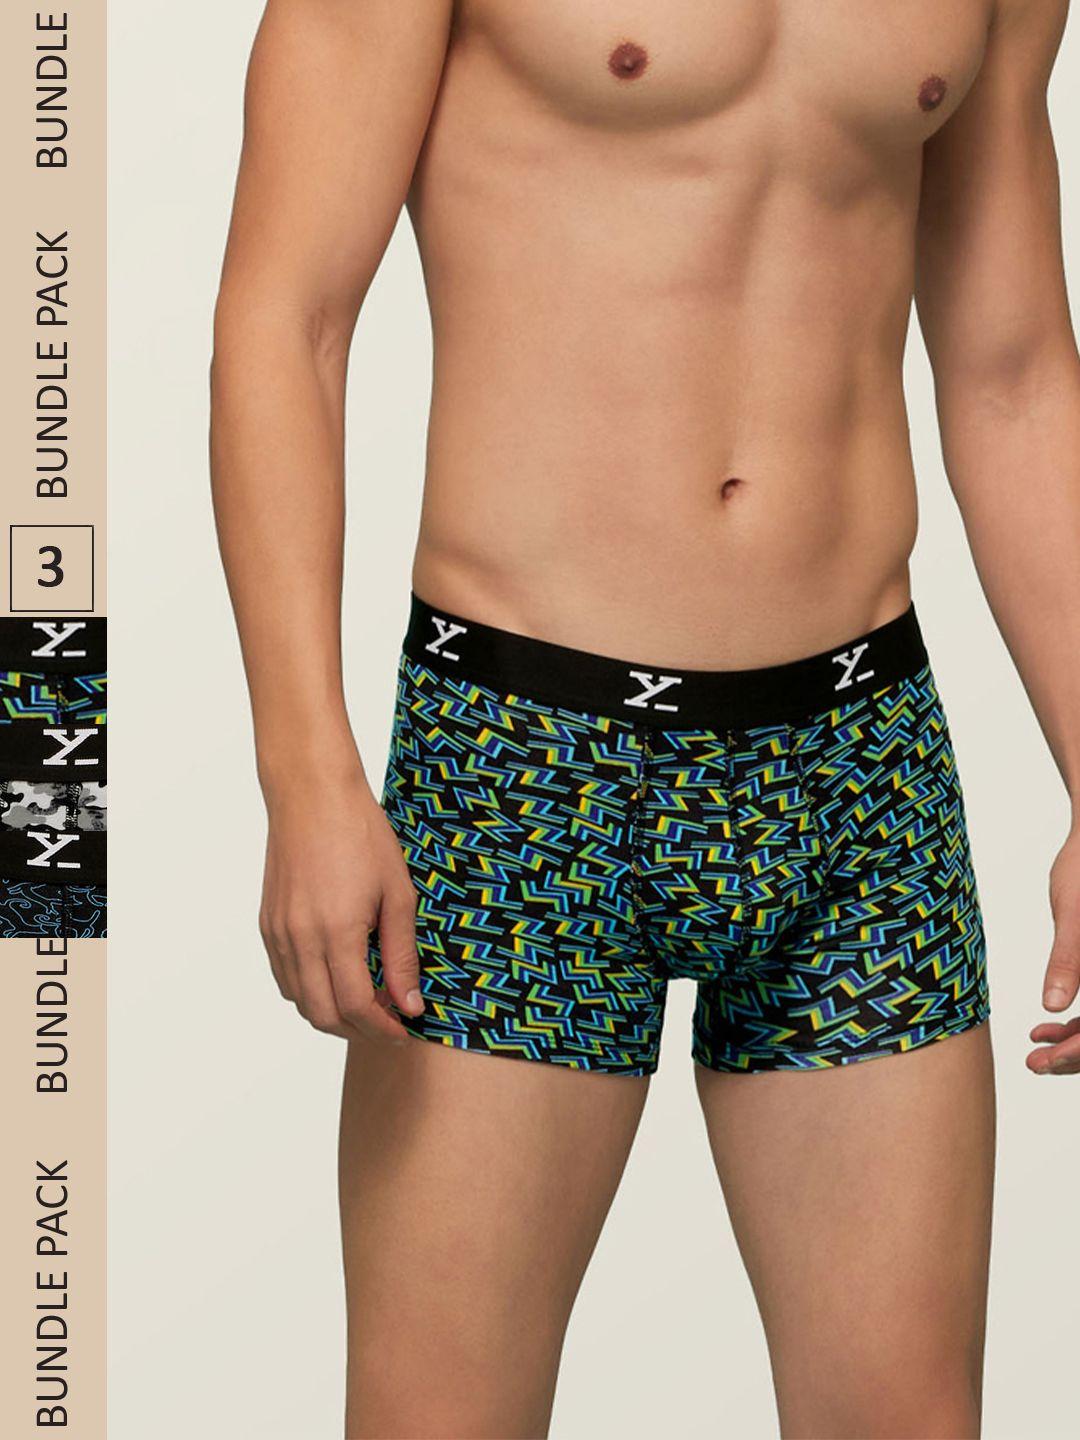 xyxx men intellisoft antimicrobial micro modal pack of 3 shuffle trunks xytrnk3pckn362